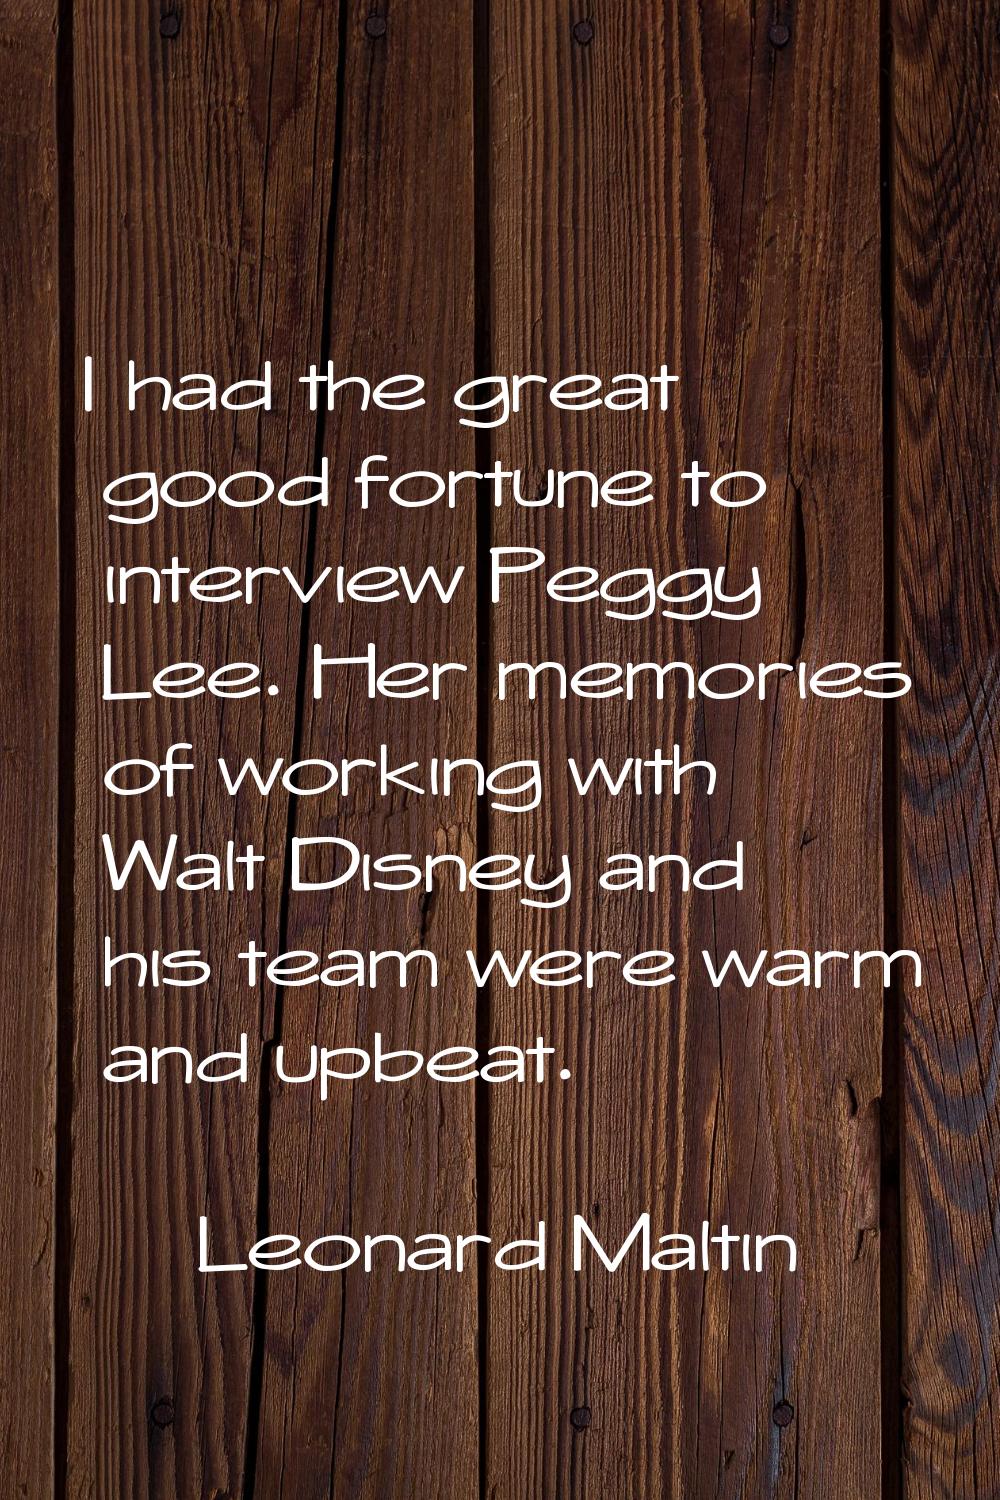 I had the great good fortune to interview Peggy Lee. Her memories of working with Walt Disney and h